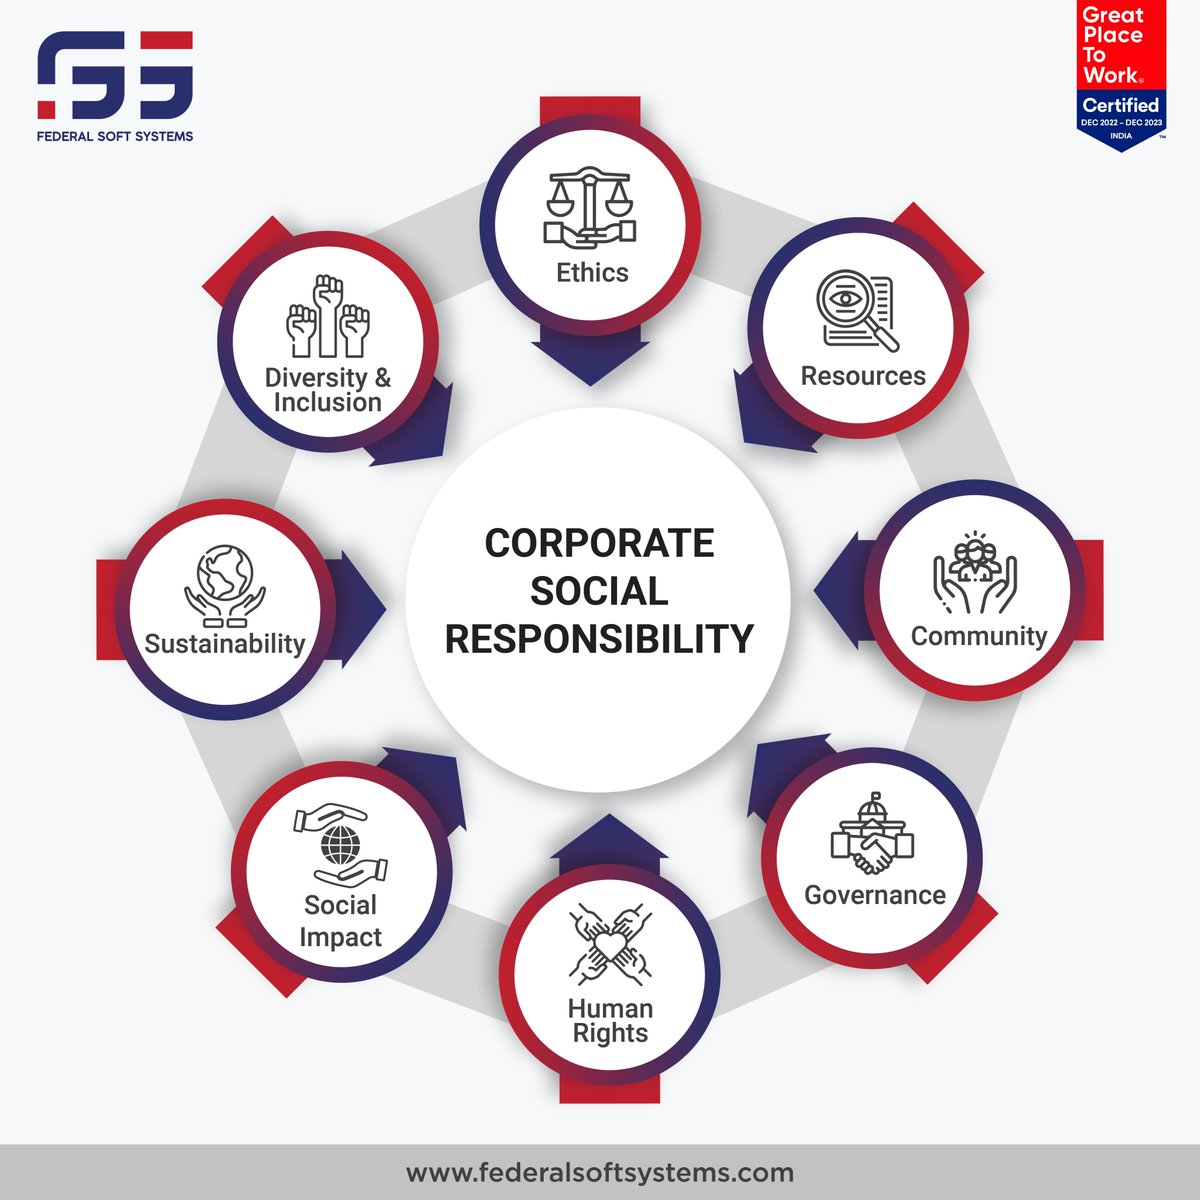 When companies engage in meaningful social responsibility initiatives, employees are more likely to feel a sense of purpose in their work and pride in their employer

#Federalsoftsystems #socialresponsibility #corporateculture #workculture #betterculture #gptw #FSS #TechCompany